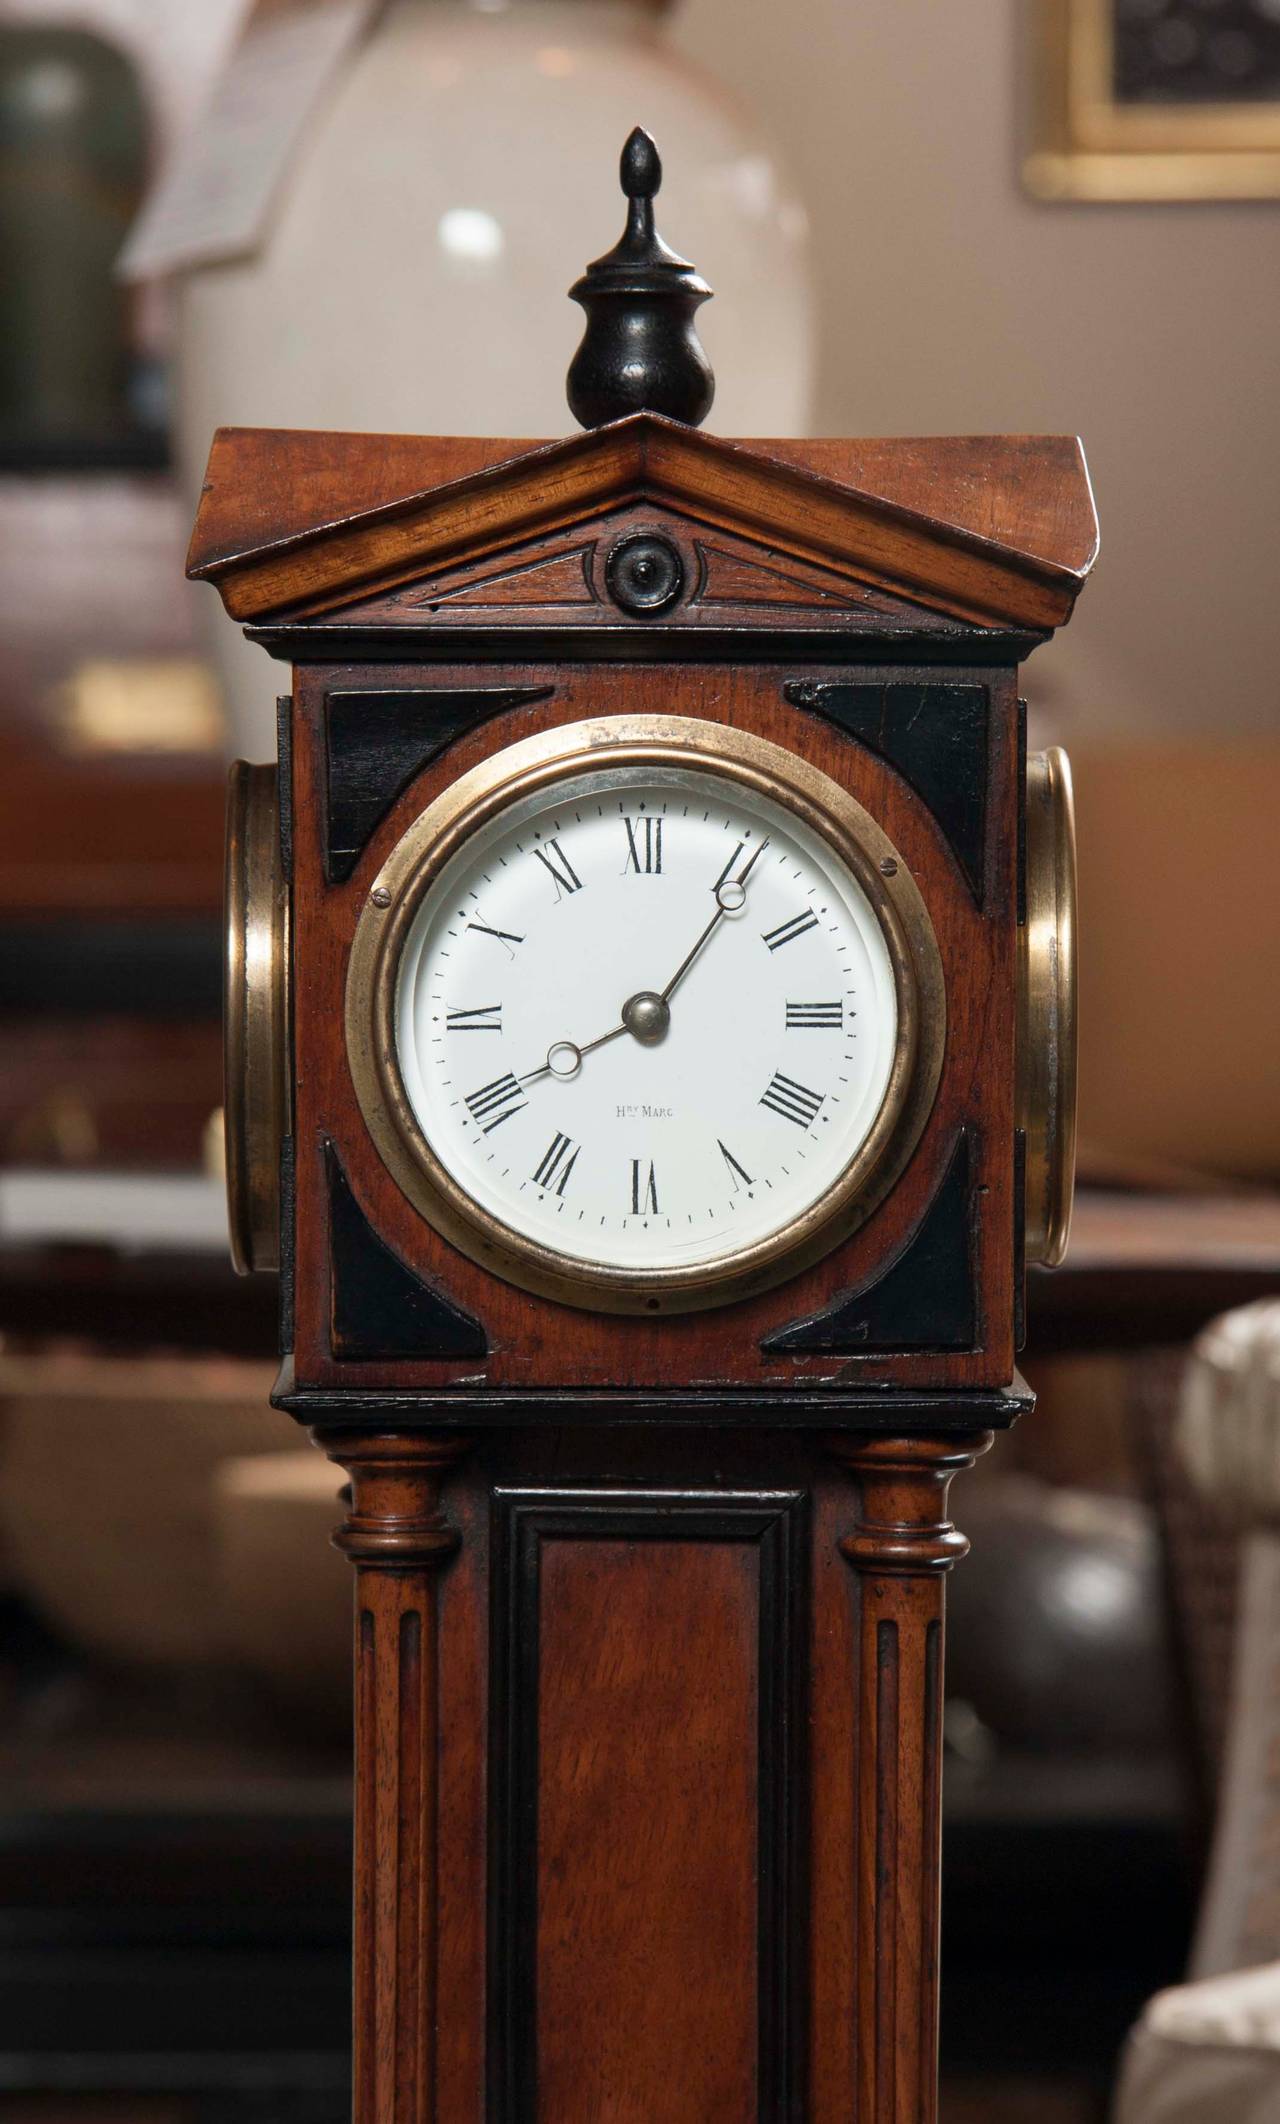 Walnut 4 Dial Tower Table Clock by Patent, Blumberg & Co, Ltd., Paris & London In Good Condition For Sale In Stamford, CT